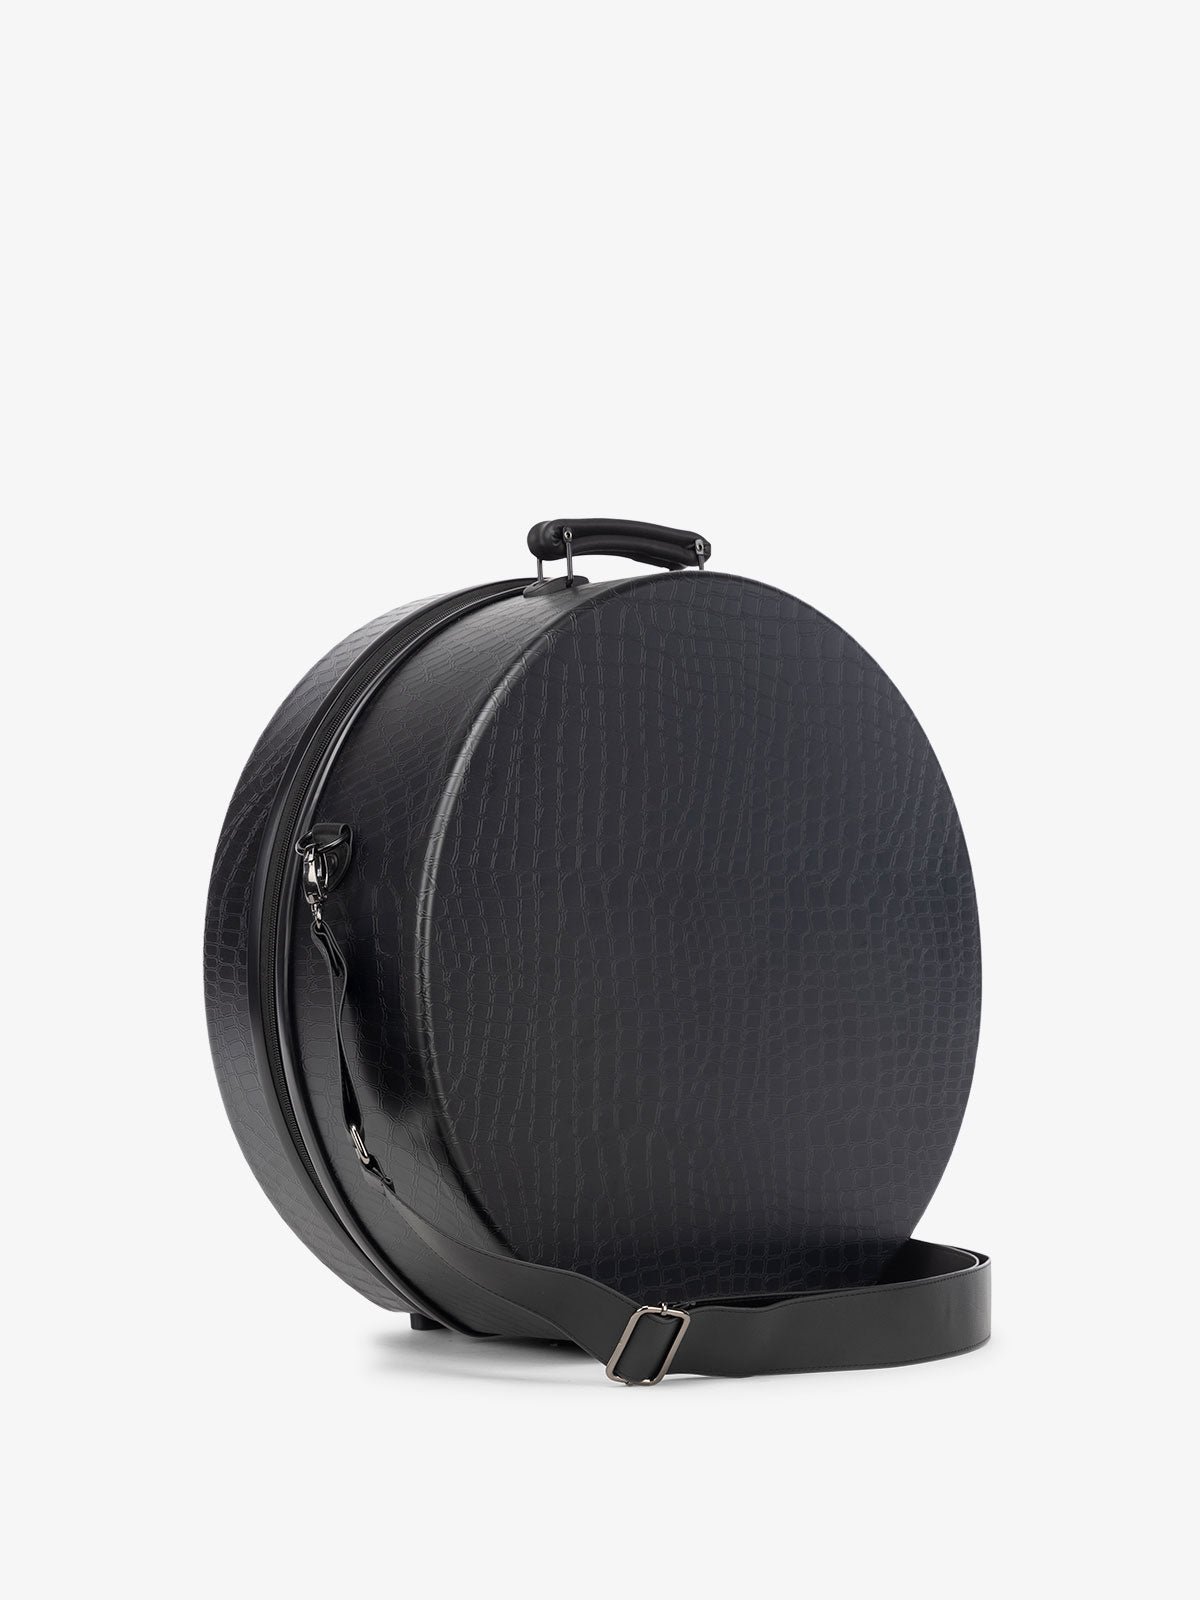 side view of Trnk large travel hat box